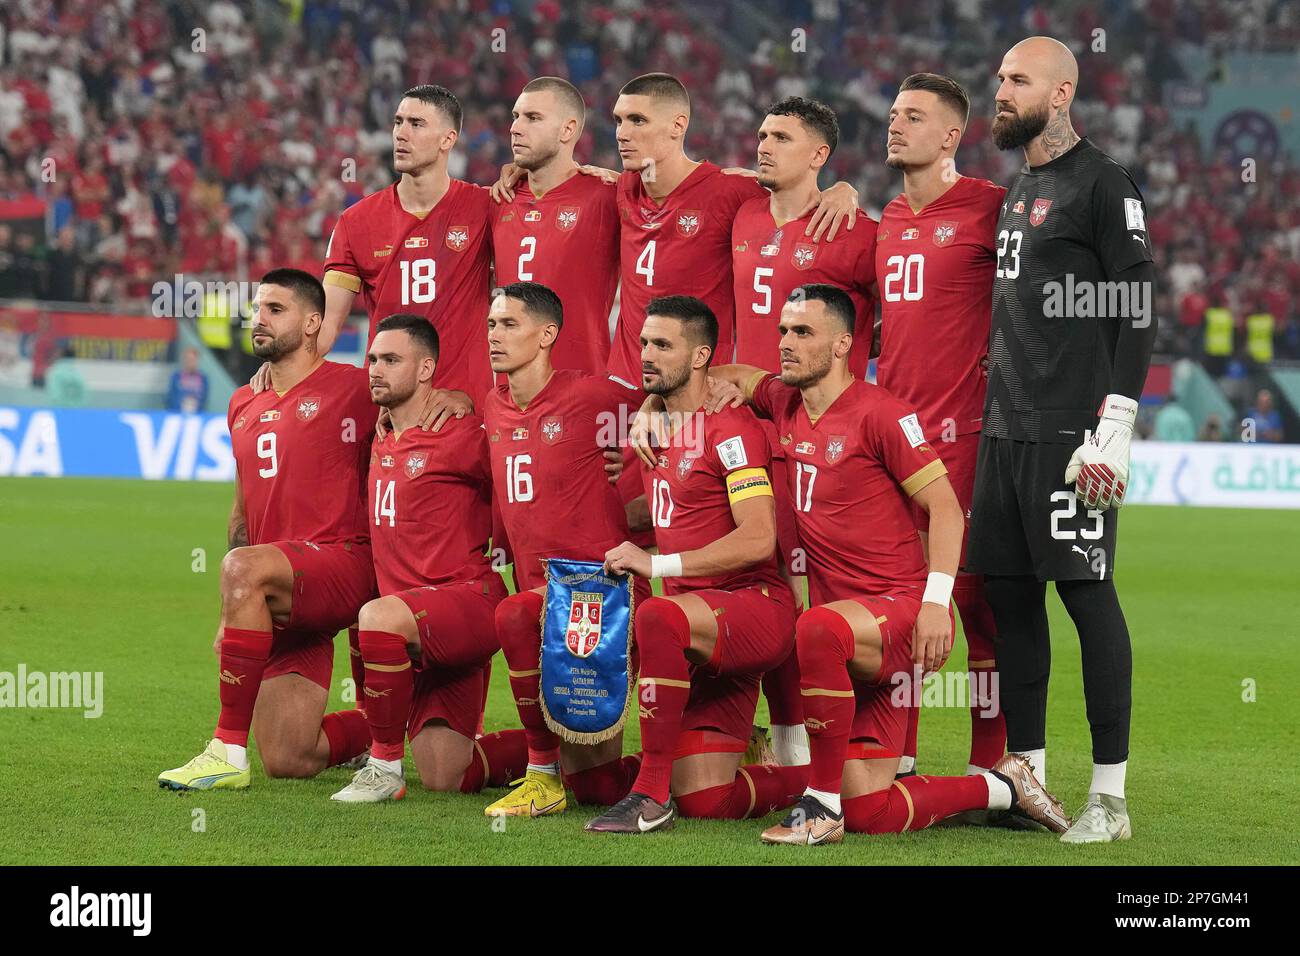 Doha, Qatar. 02nd Dec, 2022. Team Serbia pose for a group photo during the FIFA World Cup Qatar 2022 match between Serbia and Switzerland at Stadium 974. Final score; Serbia 2:3 Switzerland. (Photo by Grzegorz Wajda/SOPA Images/Sipa USA) Credit: Sipa USA/Alamy Live News Stock Photo